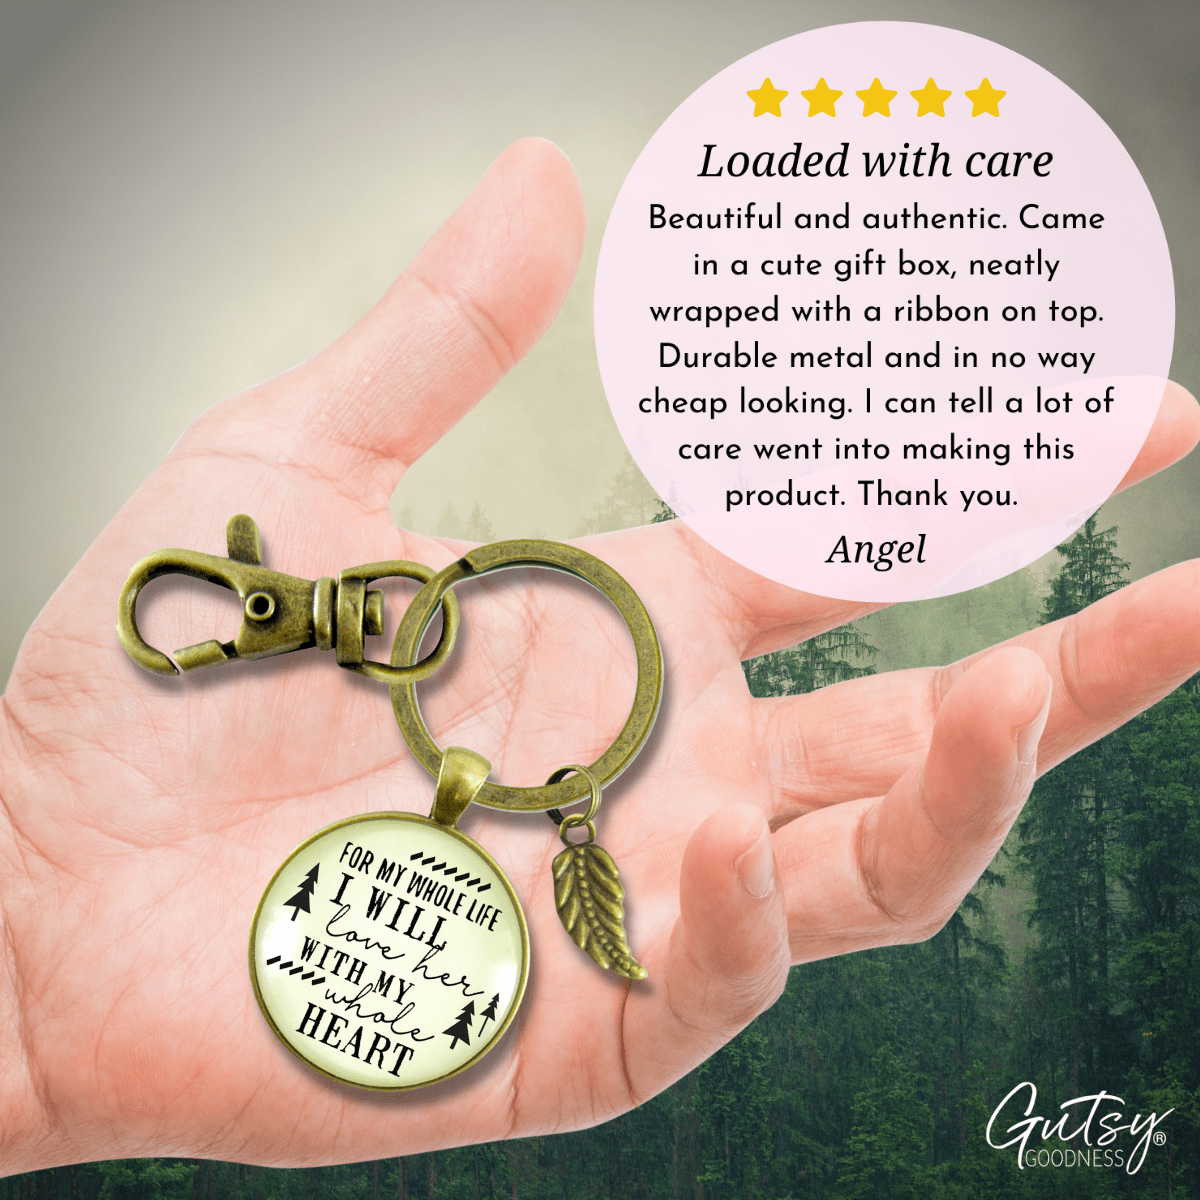 Father of The Bride Gift Keychain For Whole Life I Will Love Her Promise From Groom Wedding Key Ring - Gutsy Goodness